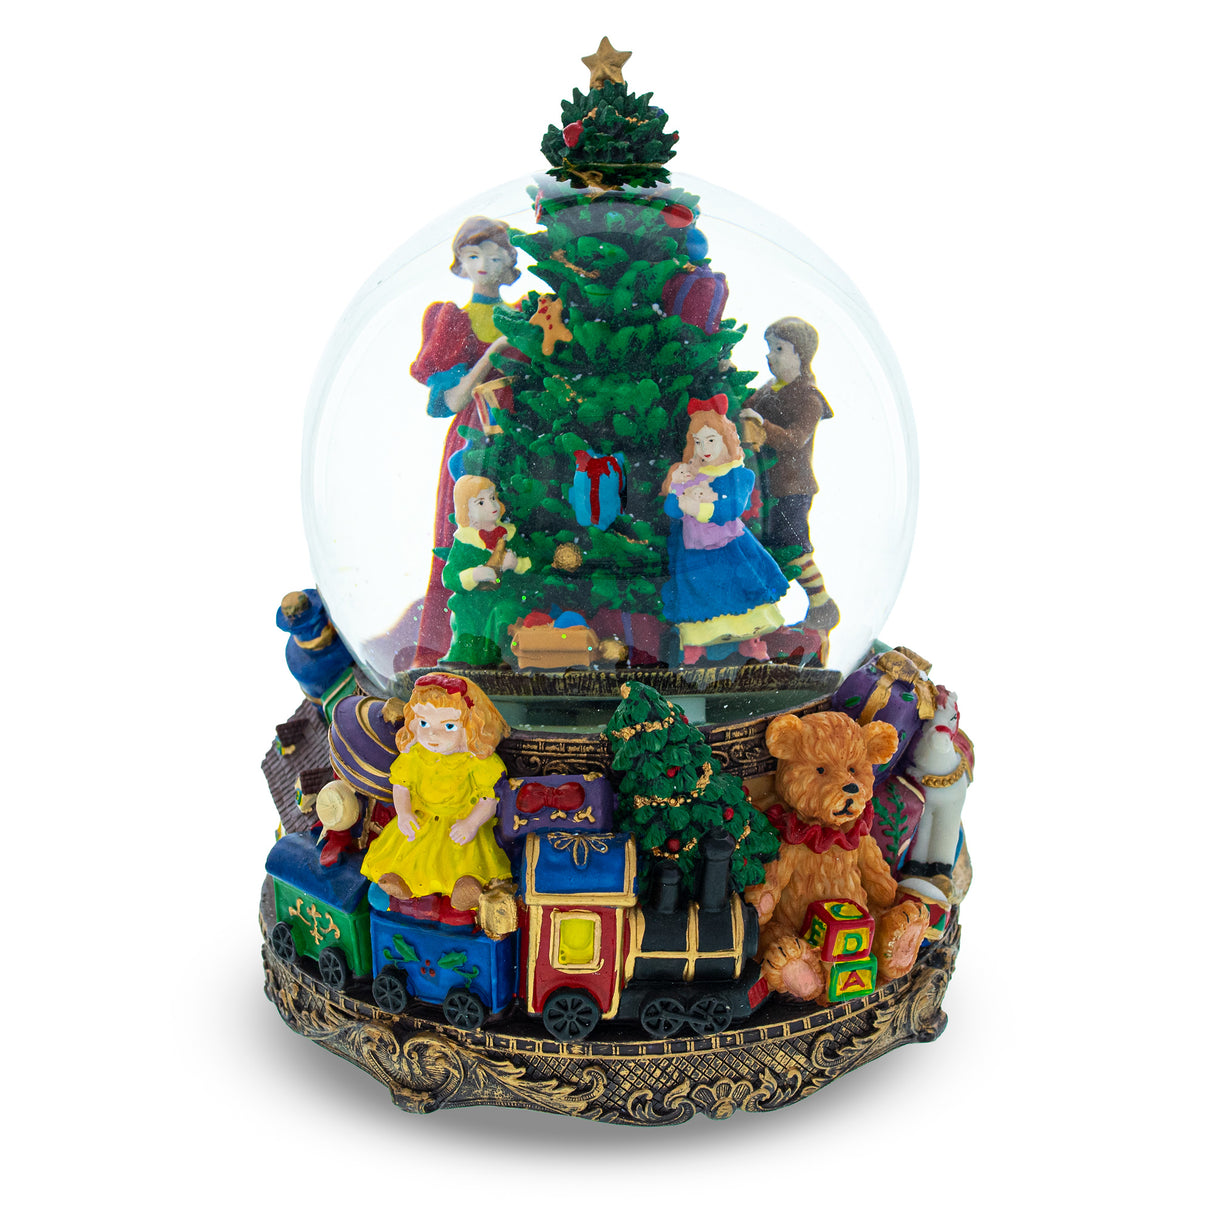 Resin Illuminated Tree Magic: LED Lights Musical Water Snow Globe, 9.6 Inches, with Children Decorating Christmas Tree in Multi color Round